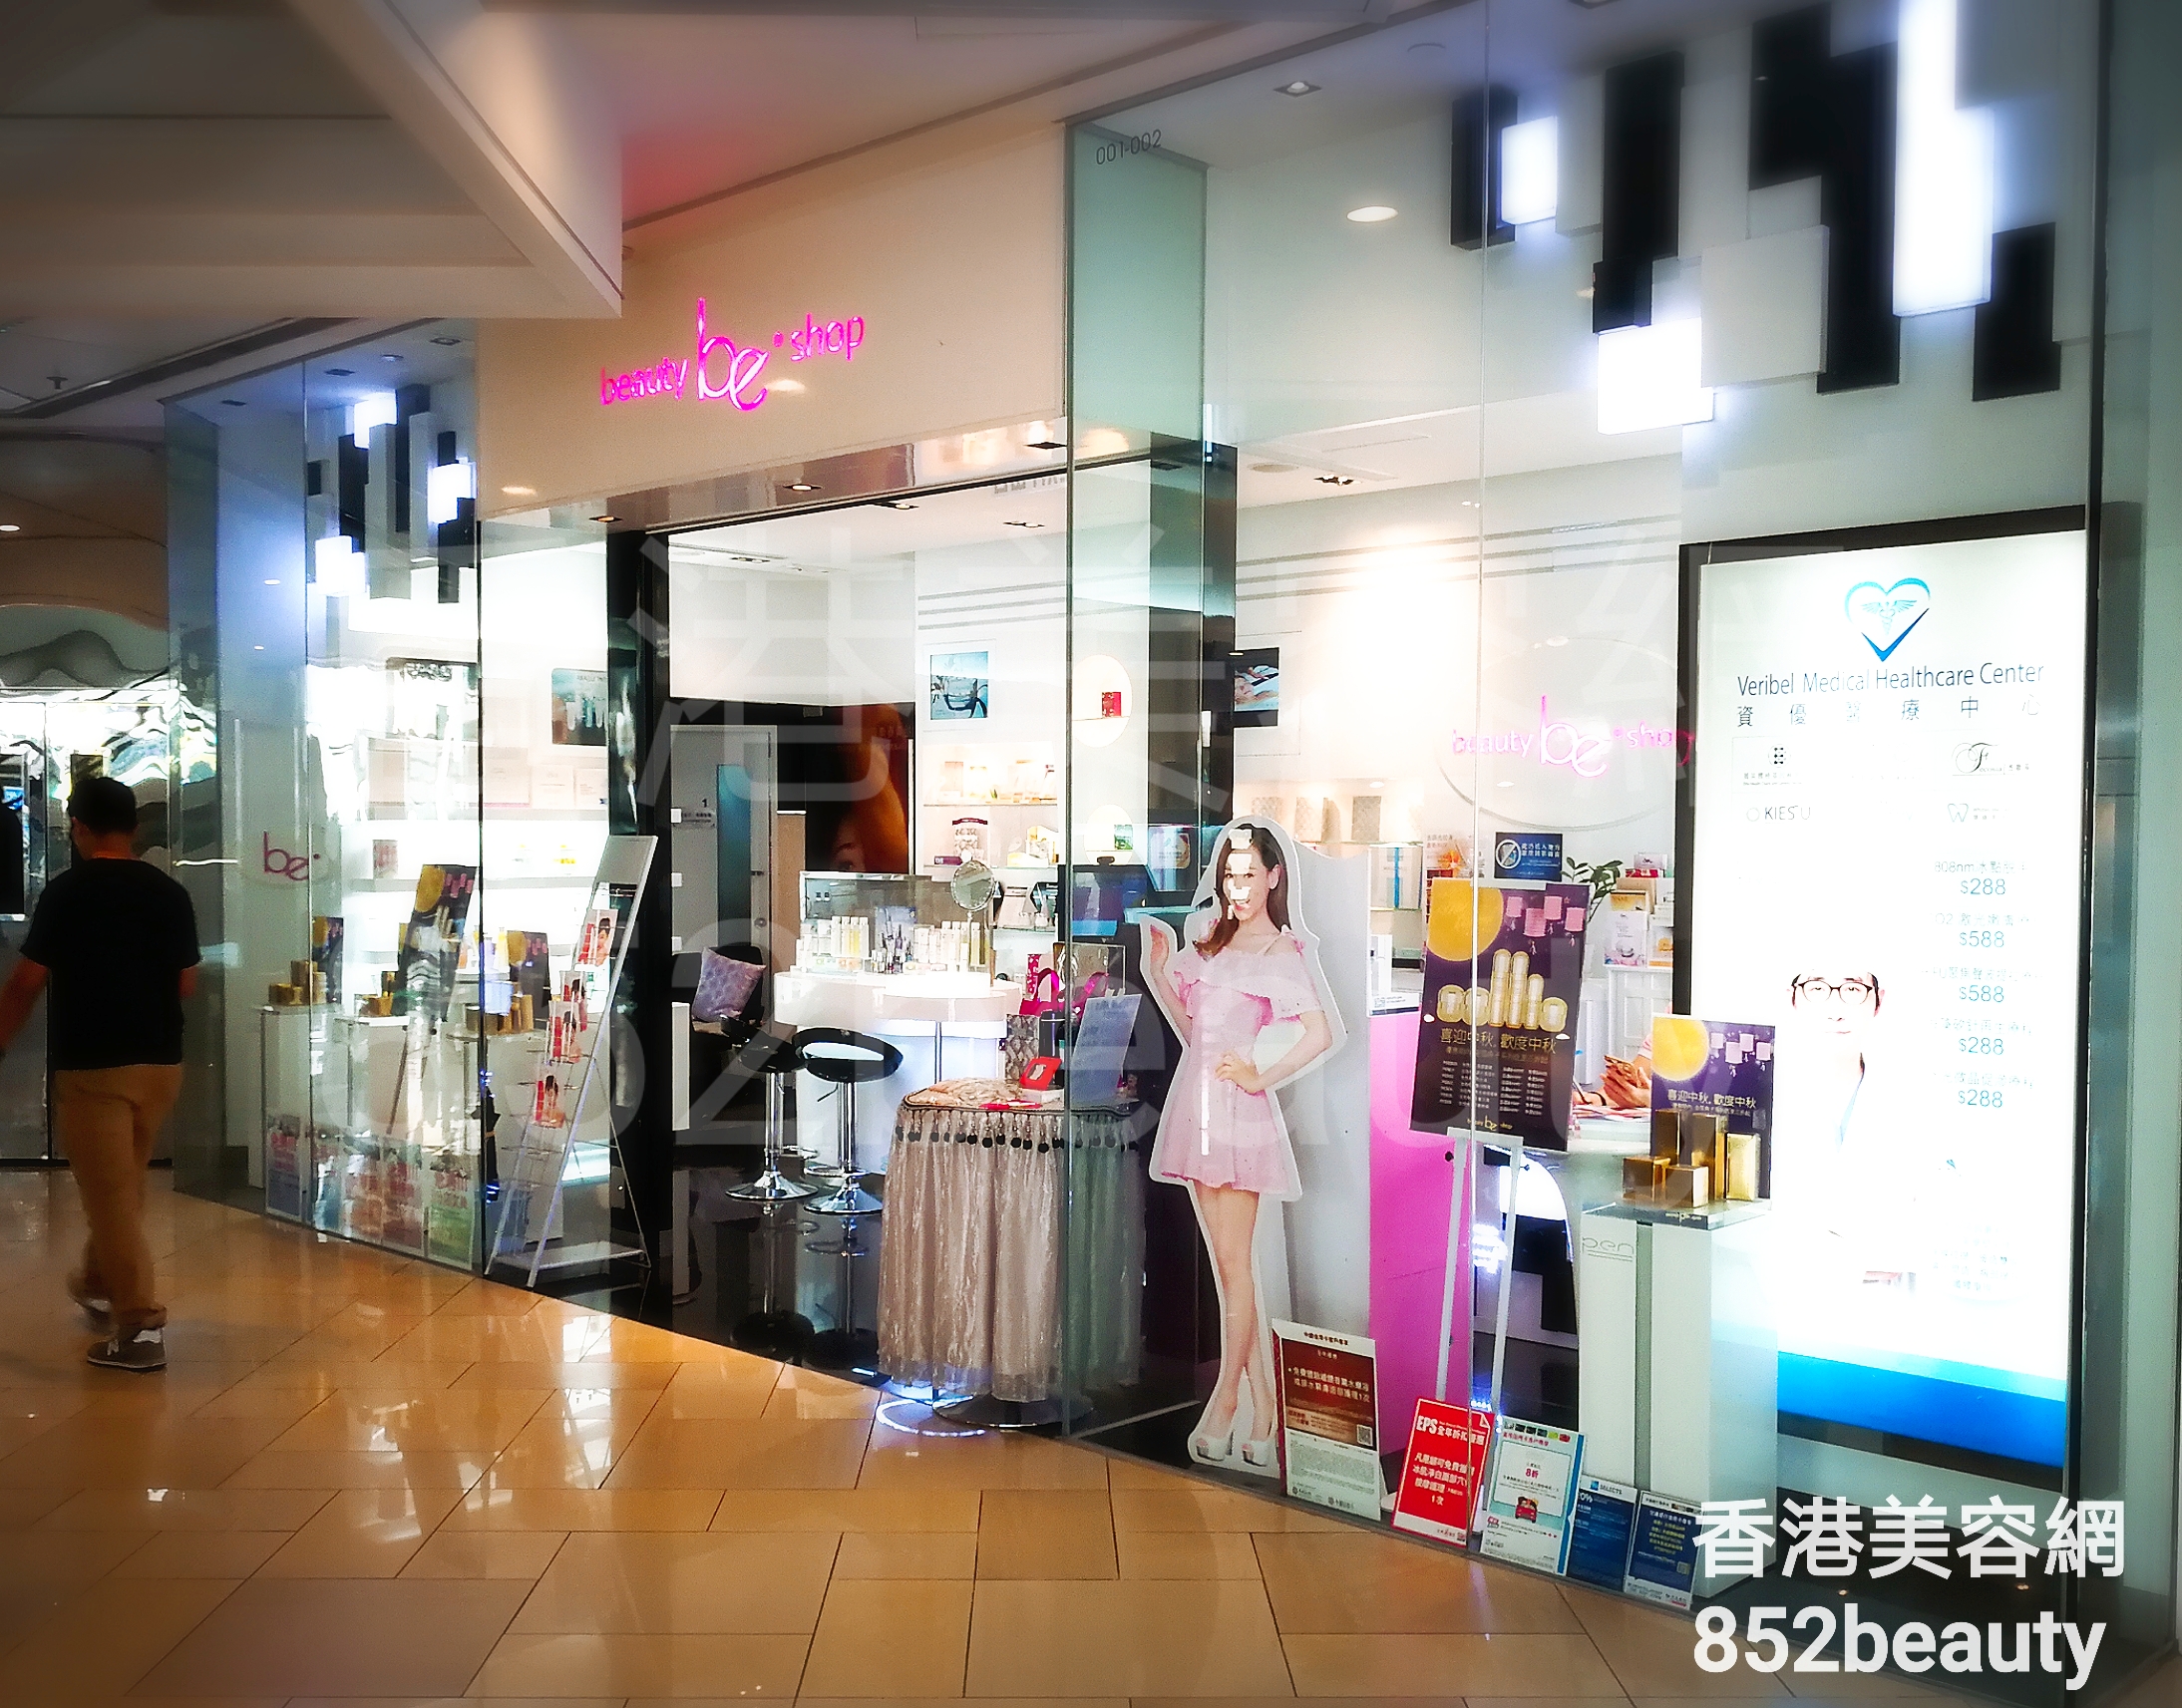 Hand and foot care: be beauty shop (港運城)